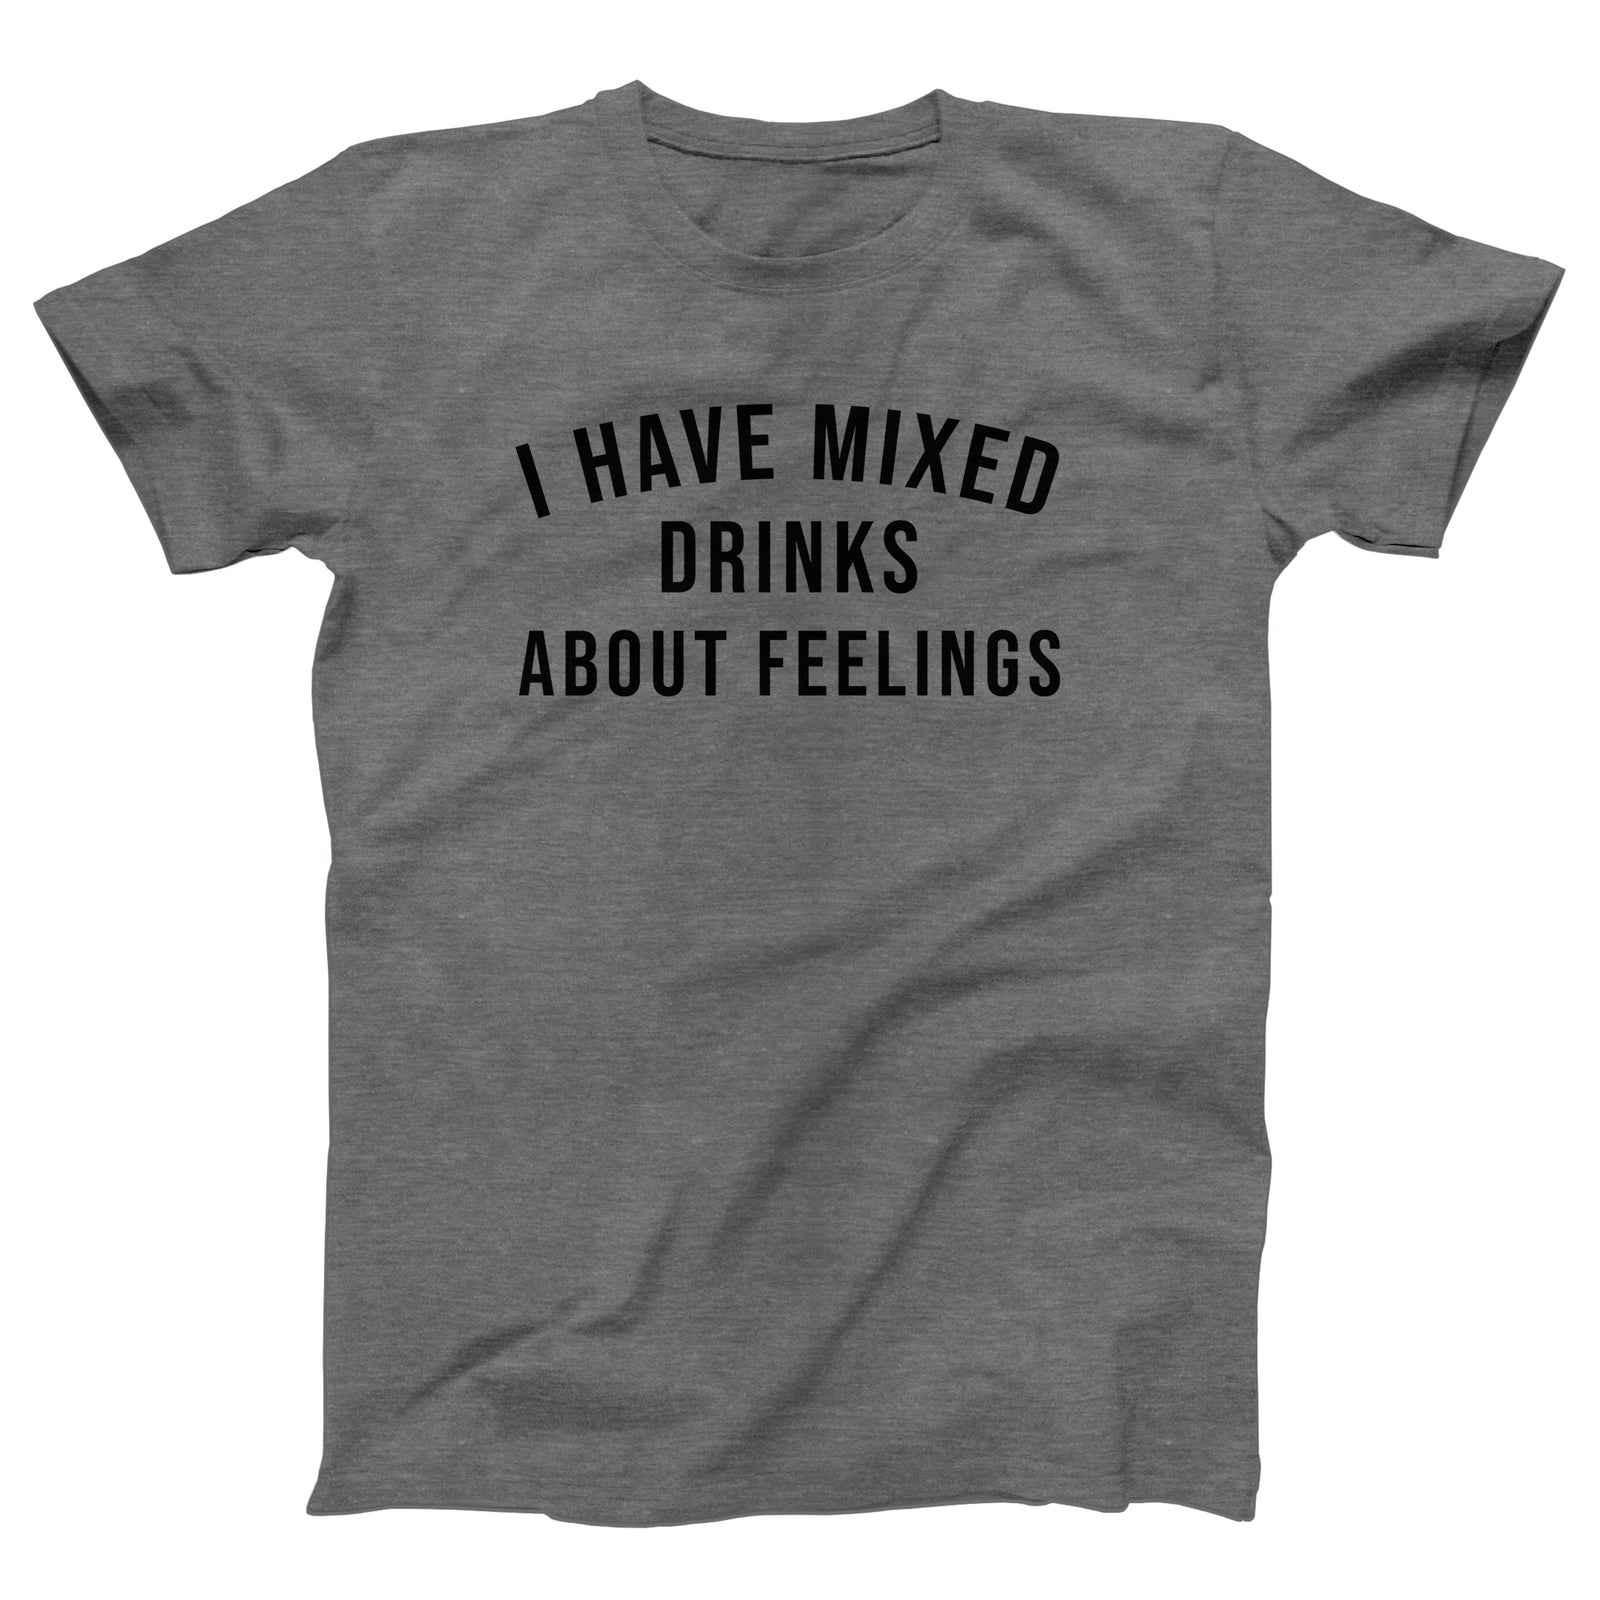 //marionmartigny.com/s/files/1/0274/2488/2766/products/i-have-mixed-drinks-about-feelings-menunisex-t-shirt-658268_5000x.jpg?v=1630330764 5000w,
    //marionmartigny.com/s/files/1/0274/2488/2766/products/i-have-mixed-drinks-about-feelings-menunisex-t-shirt-658268_4500x.jpg?v=1630330764 4500w,
    //marionmartigny.com/s/files/1/0274/2488/2766/products/i-have-mixed-drinks-about-feelings-menunisex-t-shirt-658268_4000x.jpg?v=1630330764 4000w,
    //marionmartigny.com/s/files/1/0274/2488/2766/products/i-have-mixed-drinks-about-feelings-menunisex-t-shirt-658268_3500x.jpg?v=1630330764 3500w,
    //marionmartigny.com/s/files/1/0274/2488/2766/products/i-have-mixed-drinks-about-feelings-menunisex-t-shirt-658268_3000x.jpg?v=1630330764 3000w,
    //marionmartigny.com/s/files/1/0274/2488/2766/products/i-have-mixed-drinks-about-feelings-menunisex-t-shirt-658268_2500x.jpg?v=1630330764 2500w,
    //marionmartigny.com/s/files/1/0274/2488/2766/products/i-have-mixed-drinks-about-feelings-menunisex-t-shirt-658268_2000x.jpg?v=1630330764 2000w,
    //marionmartigny.com/s/files/1/0274/2488/2766/products/i-have-mixed-drinks-about-feelings-menunisex-t-shirt-658268_1800x.jpg?v=1630330764 1800w,
    //marionmartigny.com/s/files/1/0274/2488/2766/products/i-have-mixed-drinks-about-feelings-menunisex-t-shirt-658268_1600x.jpg?v=1630330764 1600w,
    //marionmartigny.com/s/files/1/0274/2488/2766/products/i-have-mixed-drinks-about-feelings-menunisex-t-shirt-658268_1400x.jpg?v=1630330764 1400w,
    //marionmartigny.com/s/files/1/0274/2488/2766/products/i-have-mixed-drinks-about-feelings-menunisex-t-shirt-658268_1200x.jpg?v=1630330764 1200w,
    //marionmartigny.com/s/files/1/0274/2488/2766/products/i-have-mixed-drinks-about-feelings-menunisex-t-shirt-658268_1000x.jpg?v=1630330764 1000w,
    //marionmartigny.com/s/files/1/0274/2488/2766/products/i-have-mixed-drinks-about-feelings-menunisex-t-shirt-658268_800x.jpg?v=1630330764 800w,
    //marionmartigny.com/s/files/1/0274/2488/2766/products/i-have-mixed-drinks-about-feelings-menunisex-t-shirt-658268_600x.jpg?v=1630330764 600w,
    //marionmartigny.com/s/files/1/0274/2488/2766/products/i-have-mixed-drinks-about-feelings-menunisex-t-shirt-658268_400x.jpg?v=1630330764 400w,
    //marionmartigny.com/s/files/1/0274/2488/2766/products/i-have-mixed-drinks-about-feelings-menunisex-t-shirt-658268_200x.jpg?v=1630330764 200w